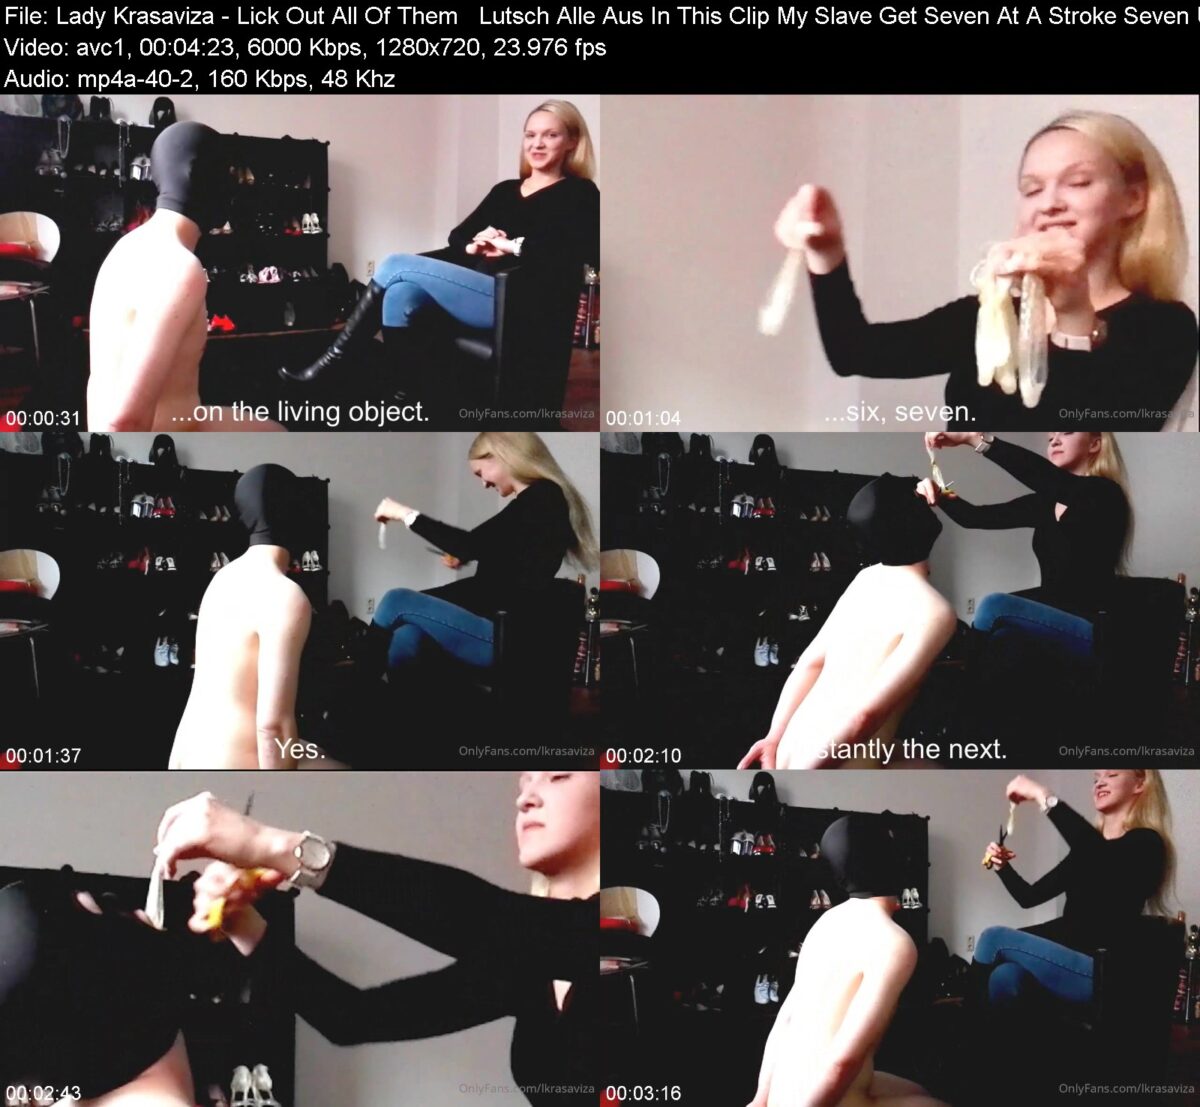 Lady Krasaviza - Lick Out All Of Them   Lutsch Alle Aus In This Clip My Slave Get Seven At A Stroke Seven Used Cu